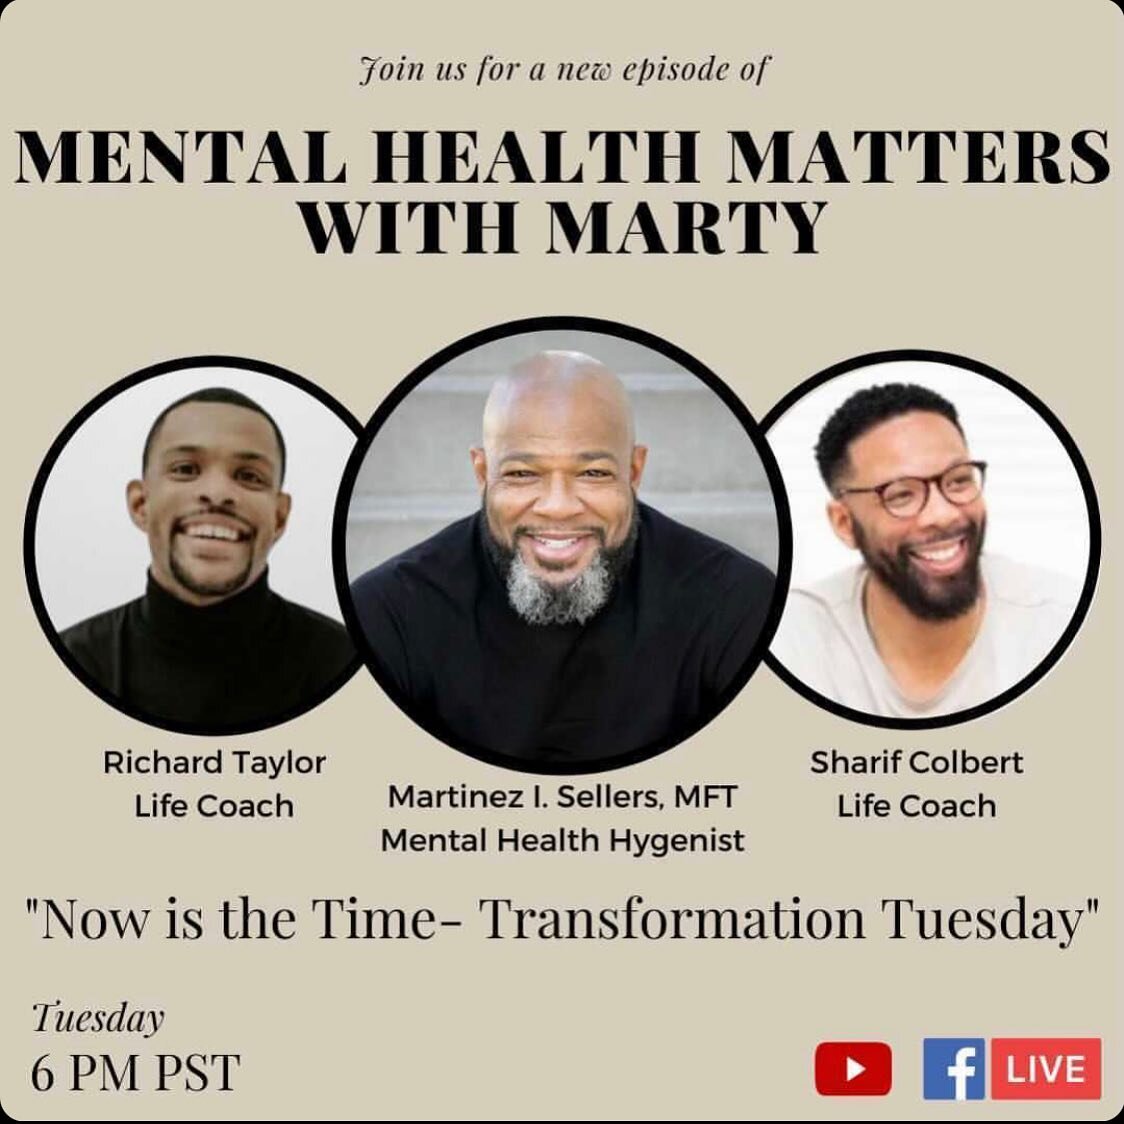 Getting ready to go live with @mental_health_marty at 6PM PT JOIN US!